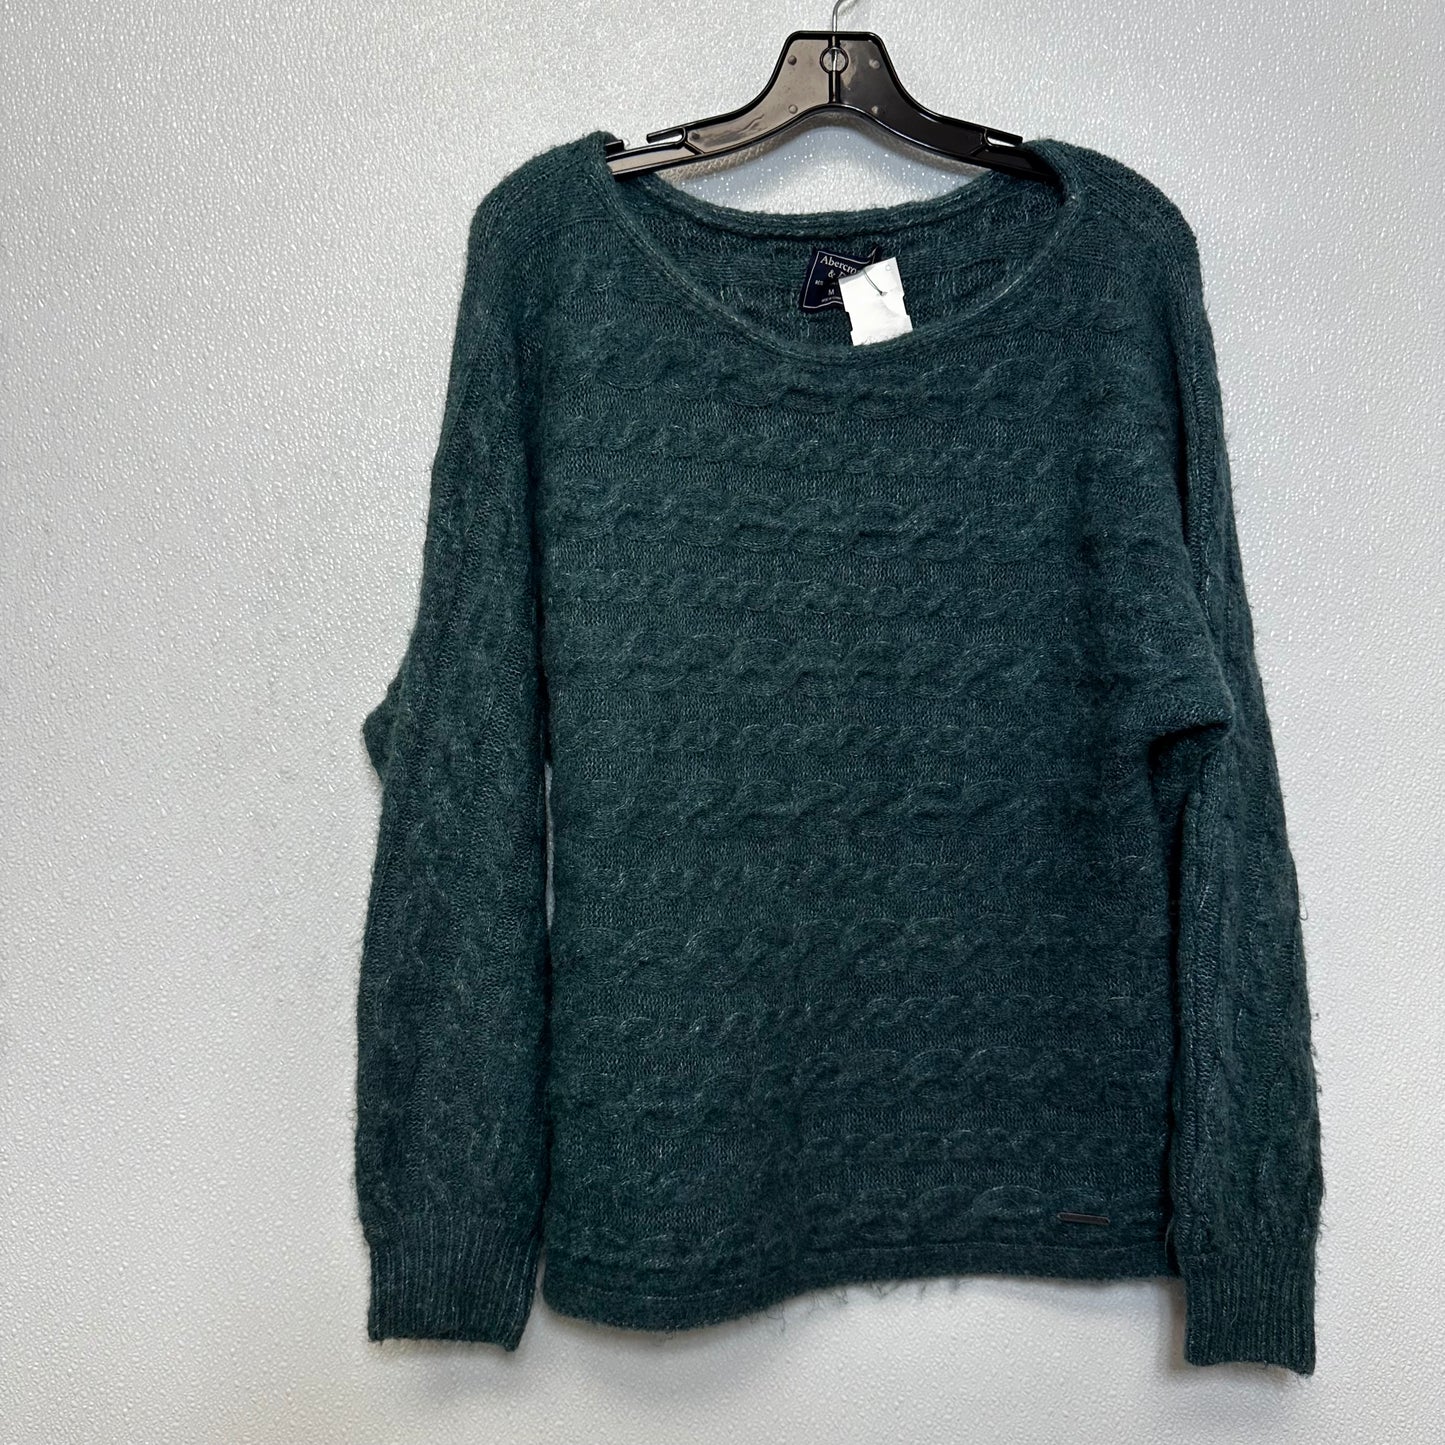 Green Sweater Abercrombie And Fitch, Size M